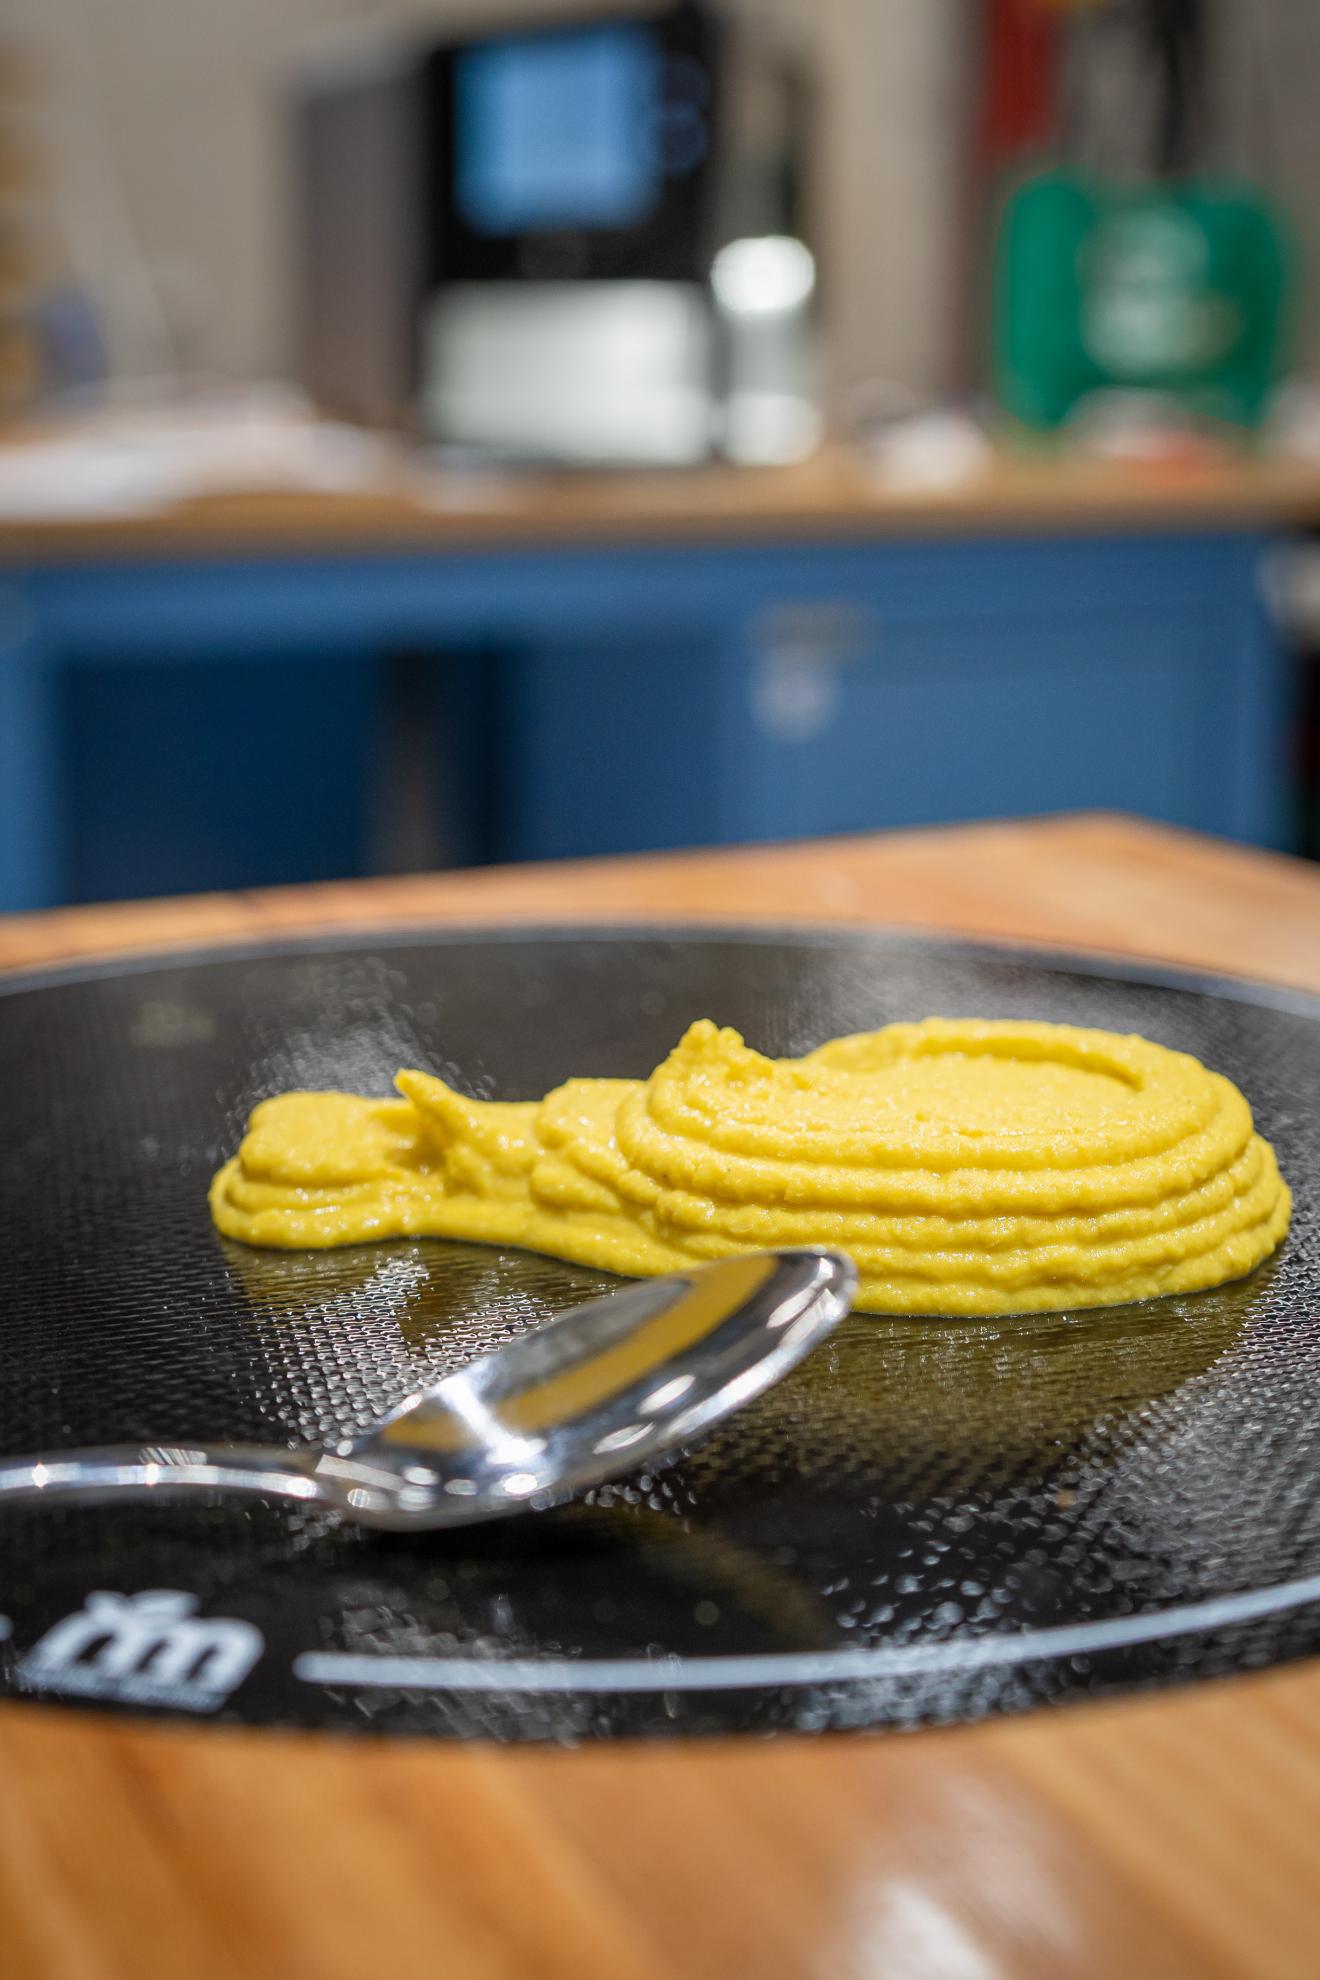 Example of a 3D-printed puree